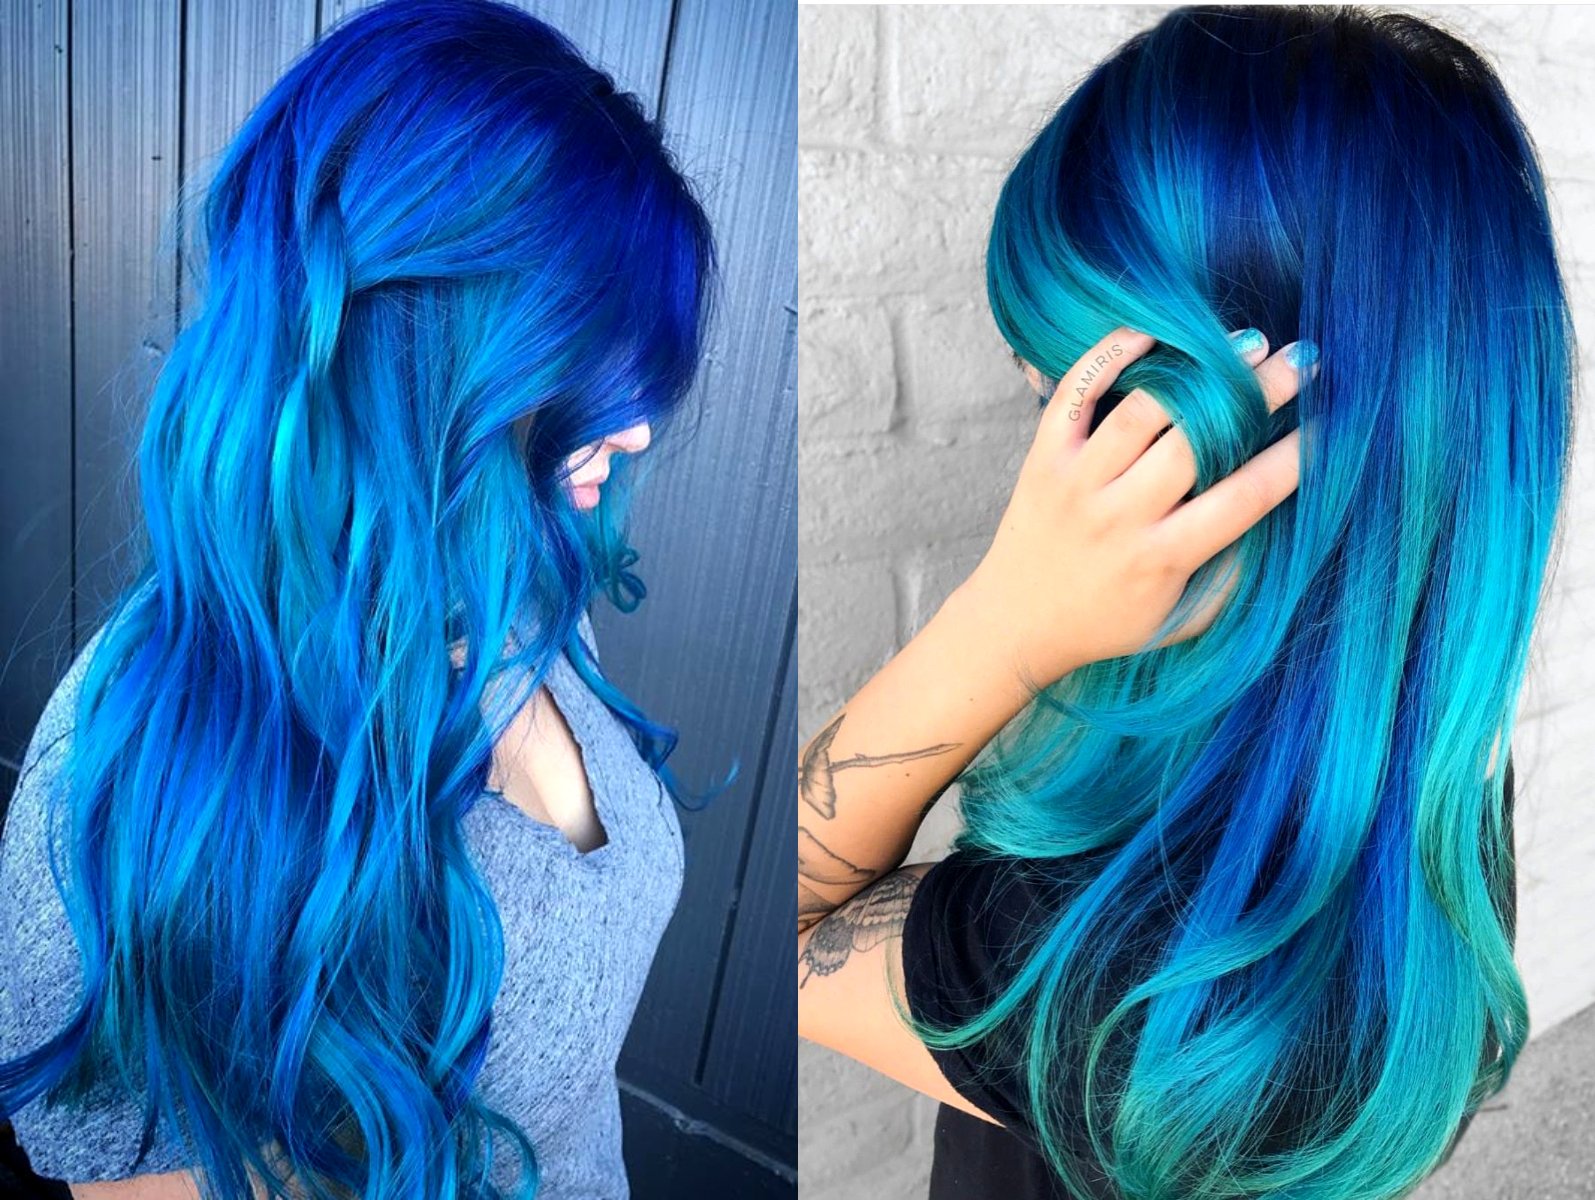 1. 20 Best Blue Balayage Hair Color Ideas on Pinterest - wide 1